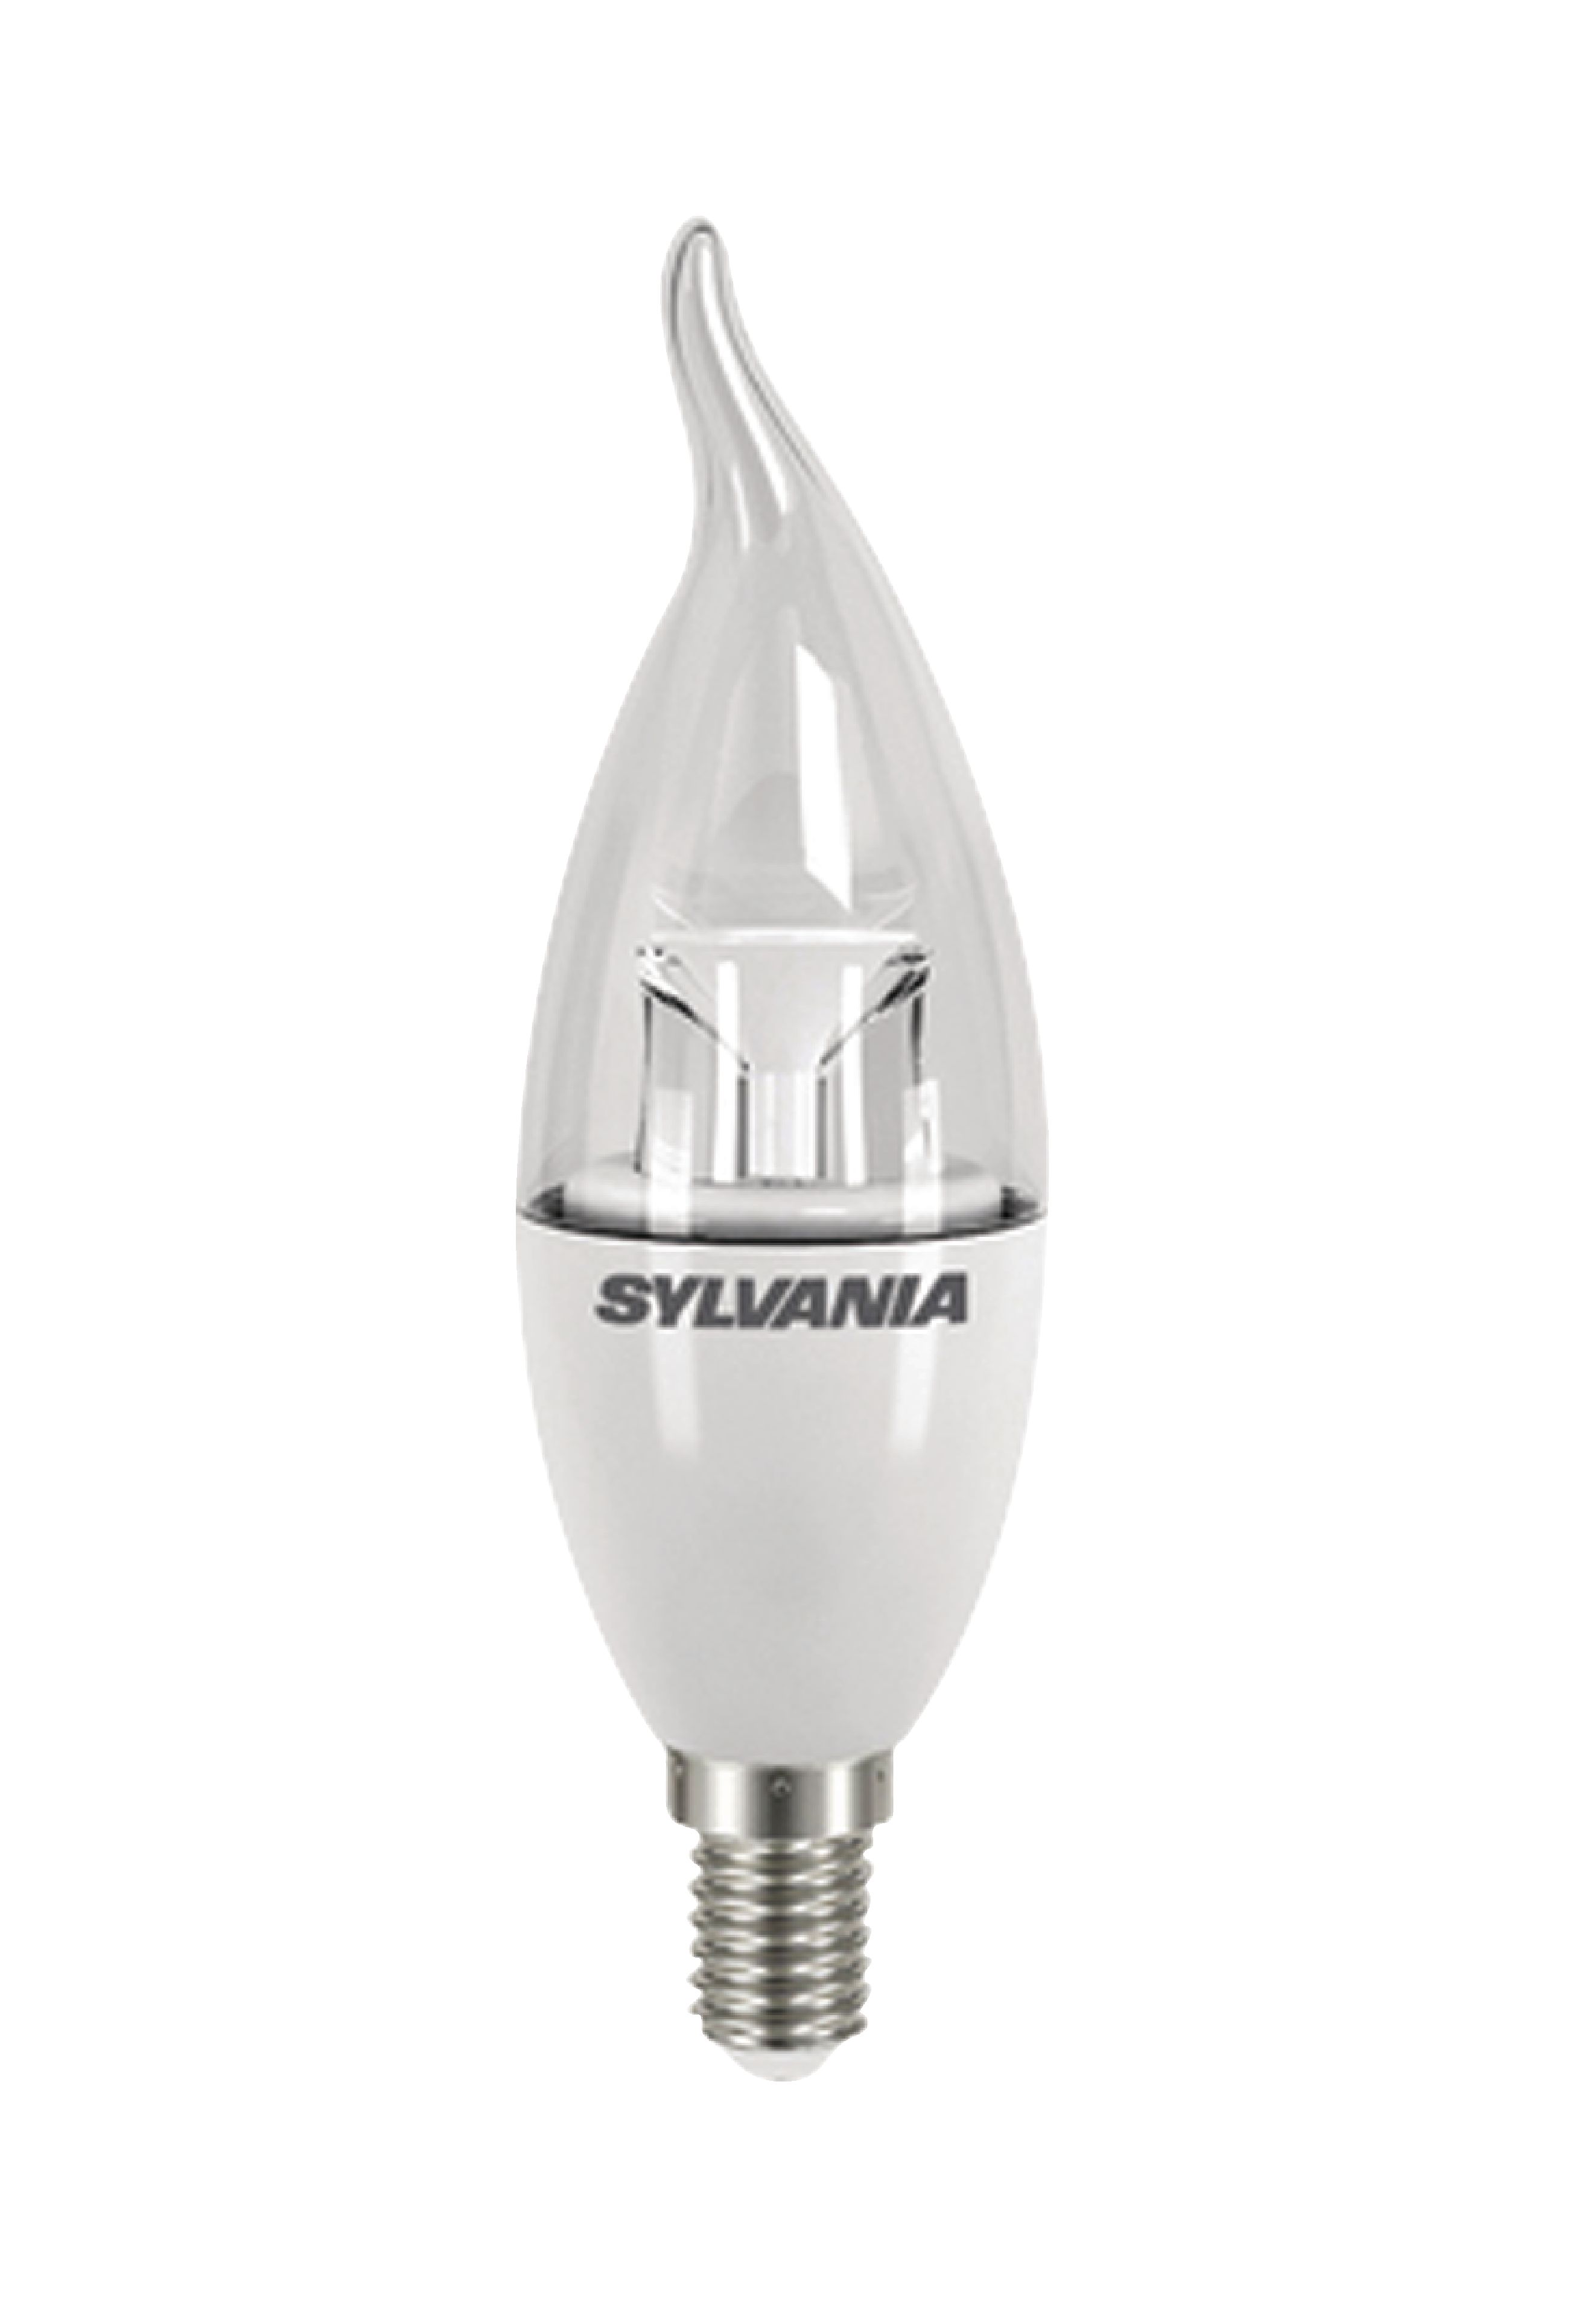 NEW Genuine Sylvania LED Lamp E14 Candle Bent Flame Tip 6.5W 470 lm 2700 K Clear - Photo 1/1